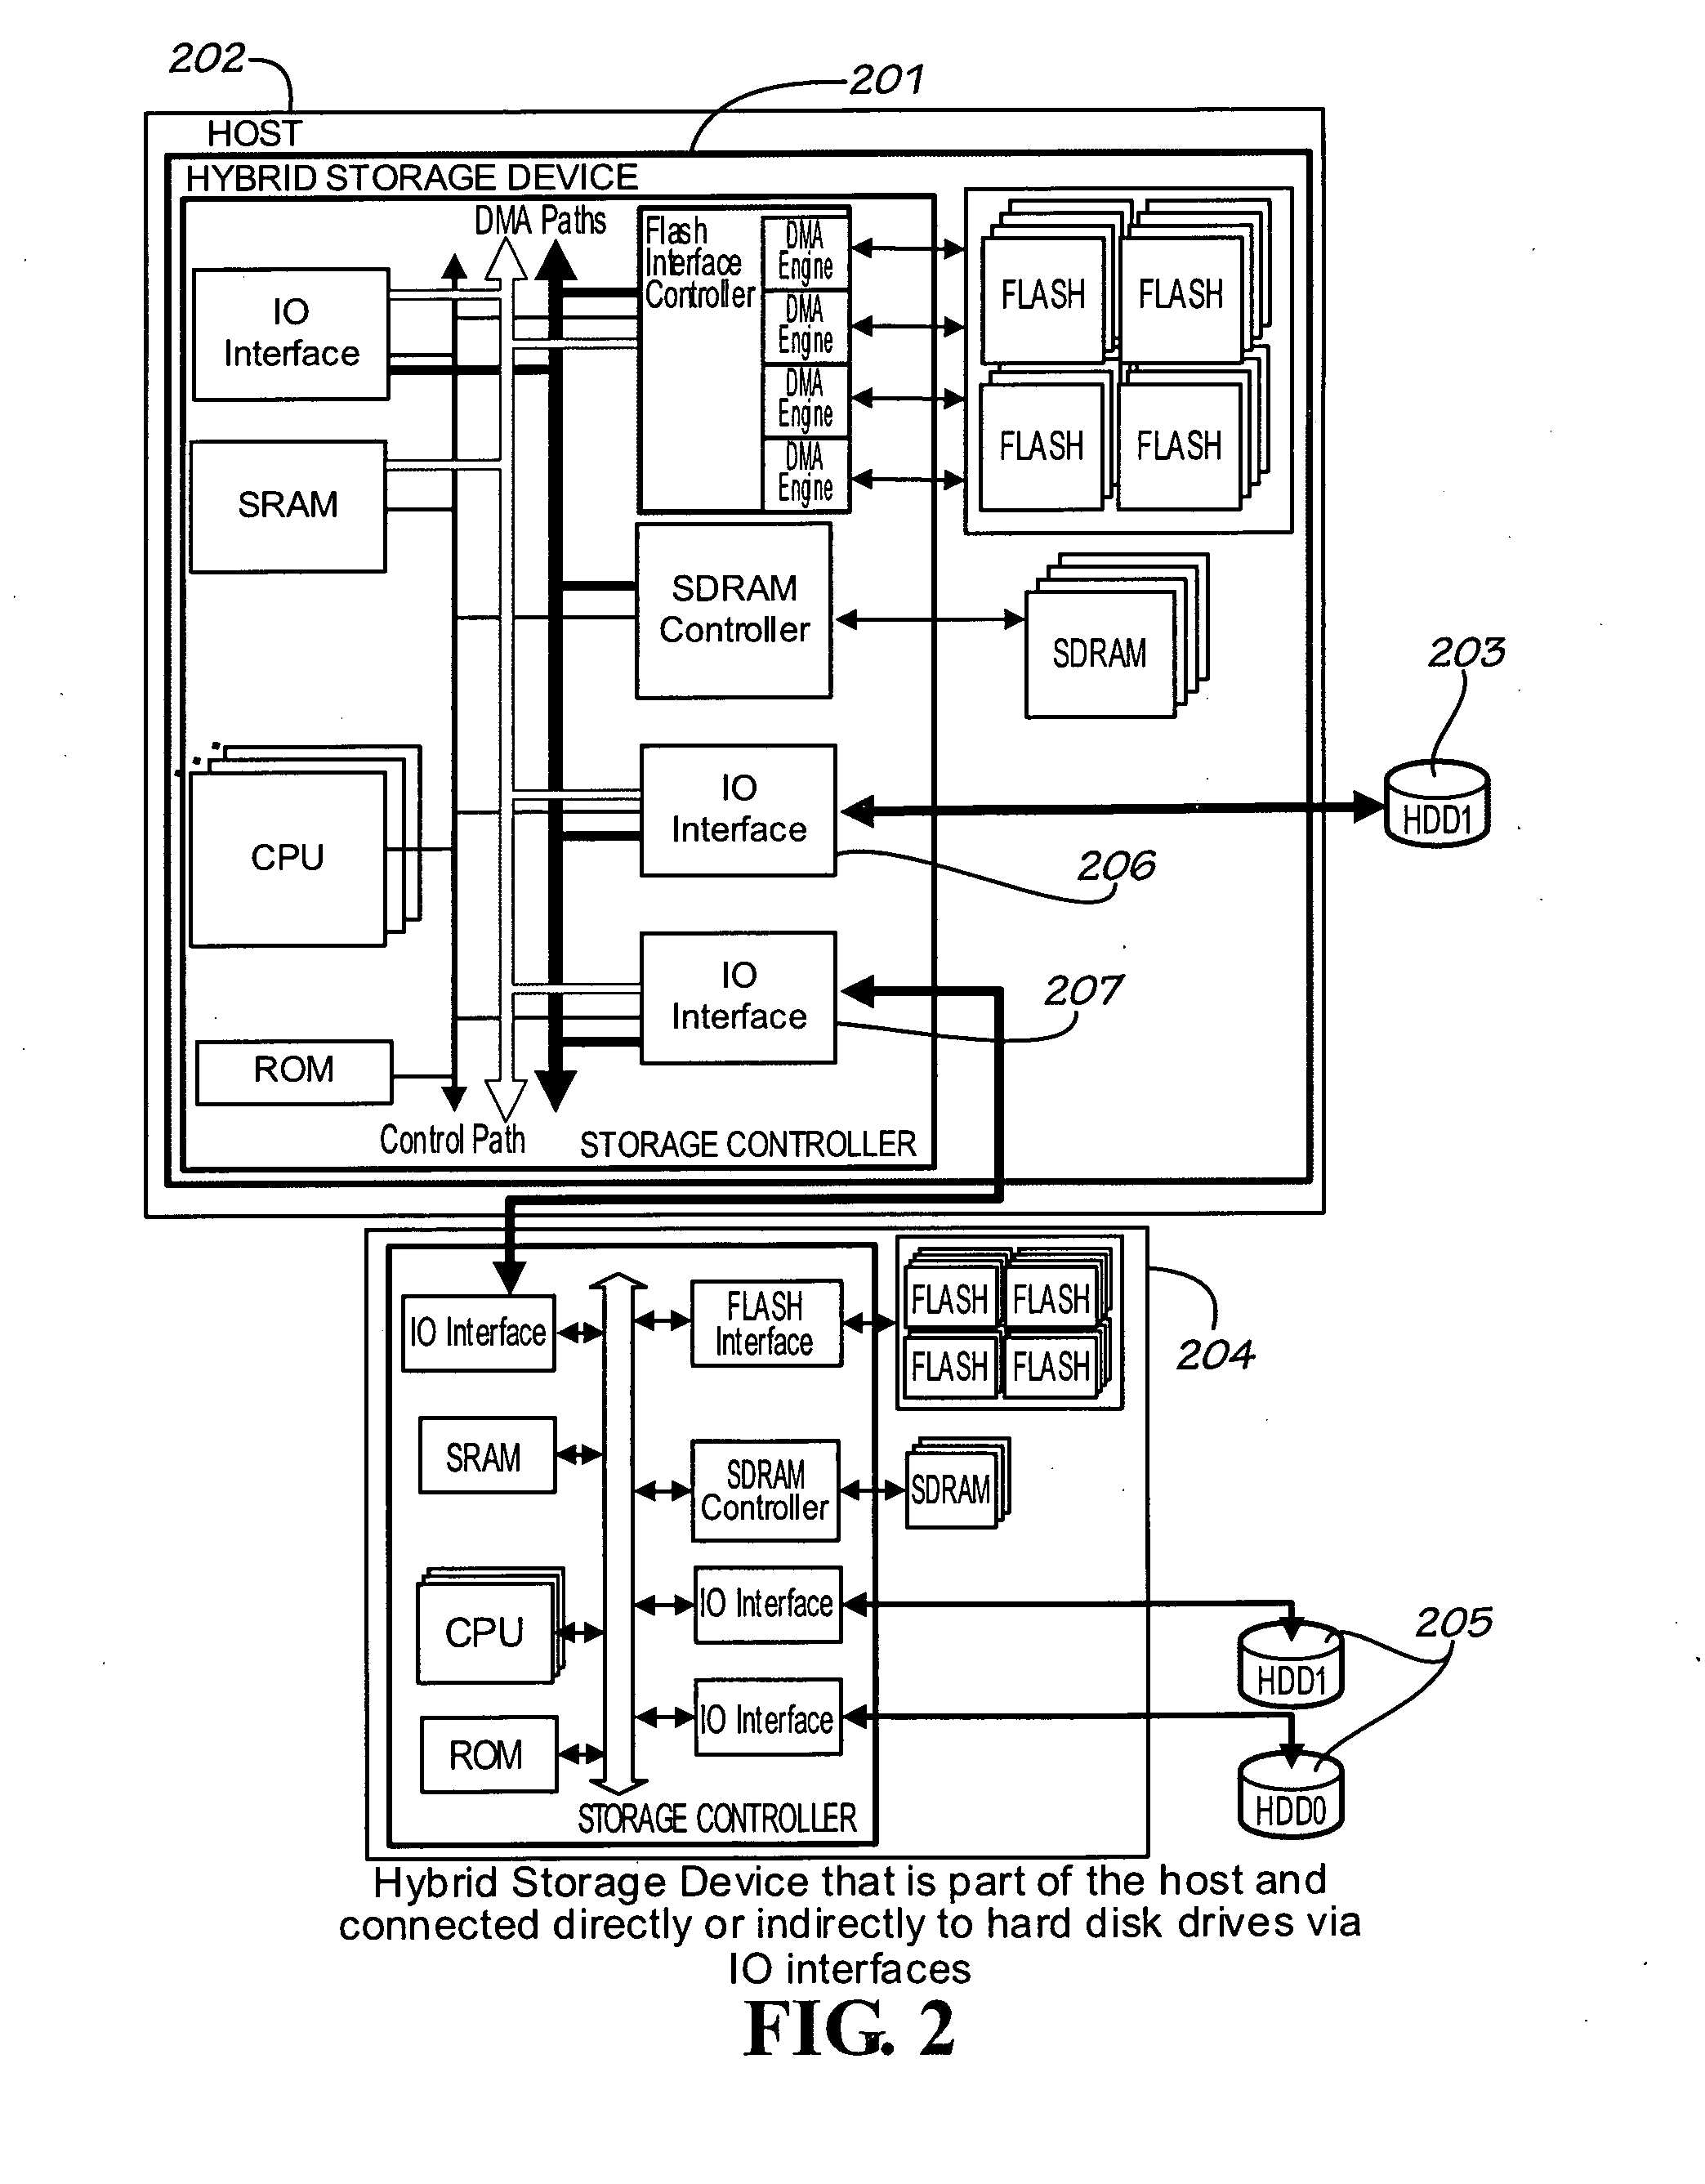 Multi-Leveled Cache Management in a Hybrid Storage System